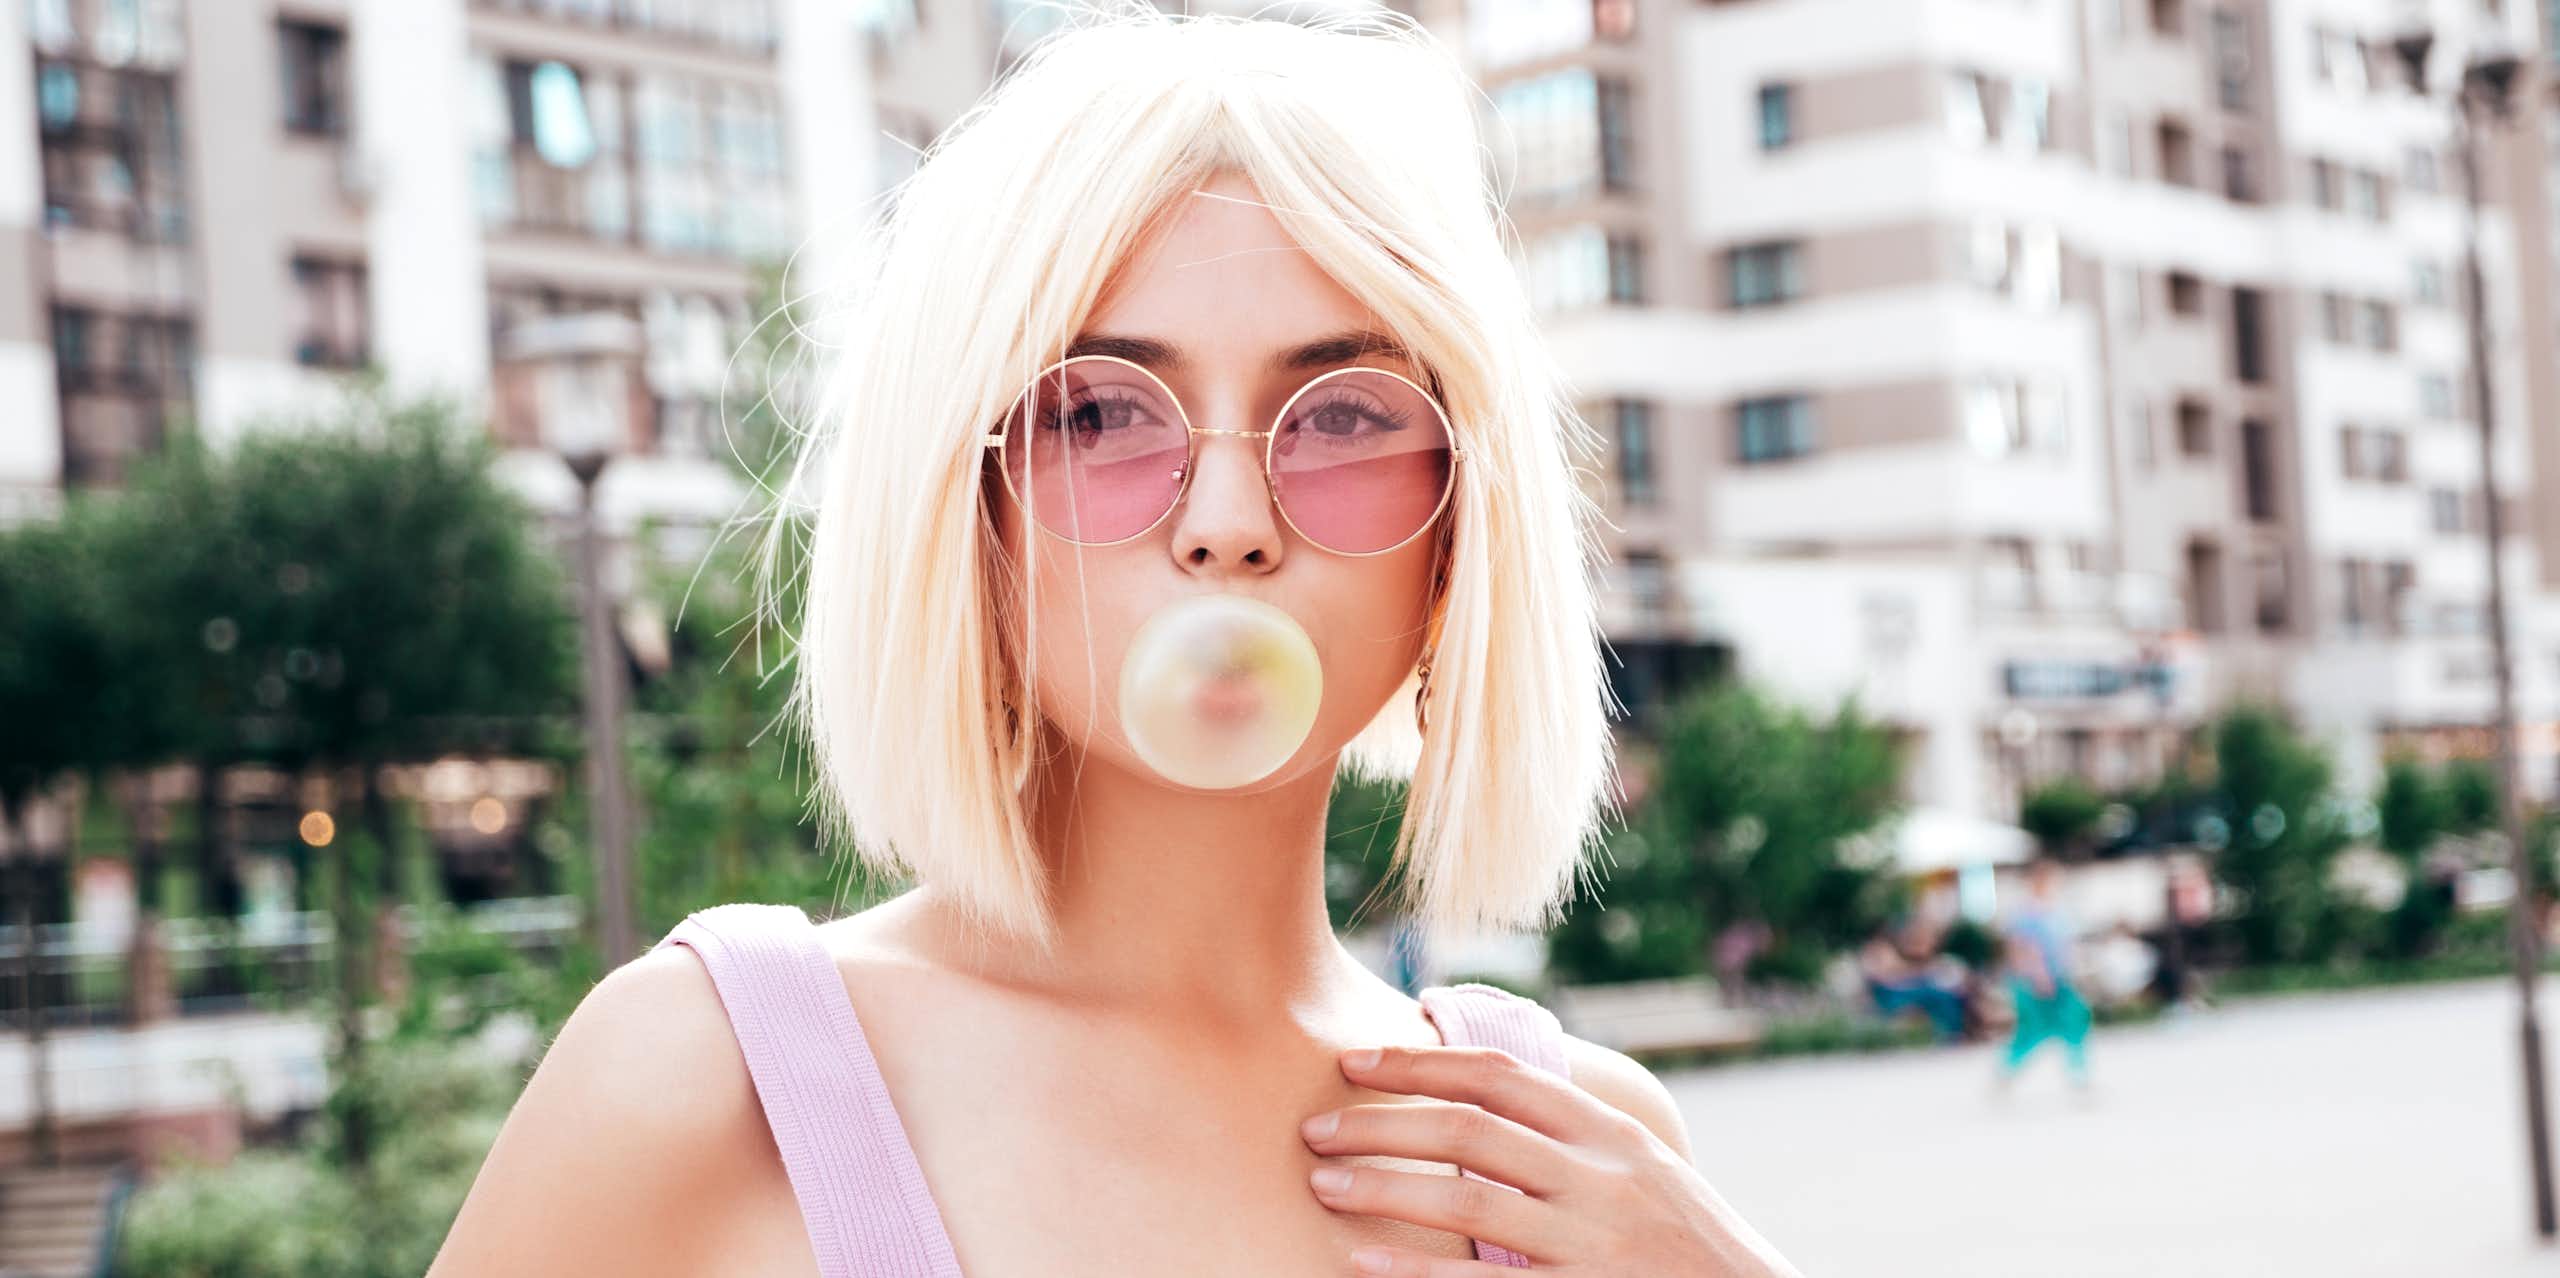 Chewing gum has been linked to better diets – but it’s no way to improve your health